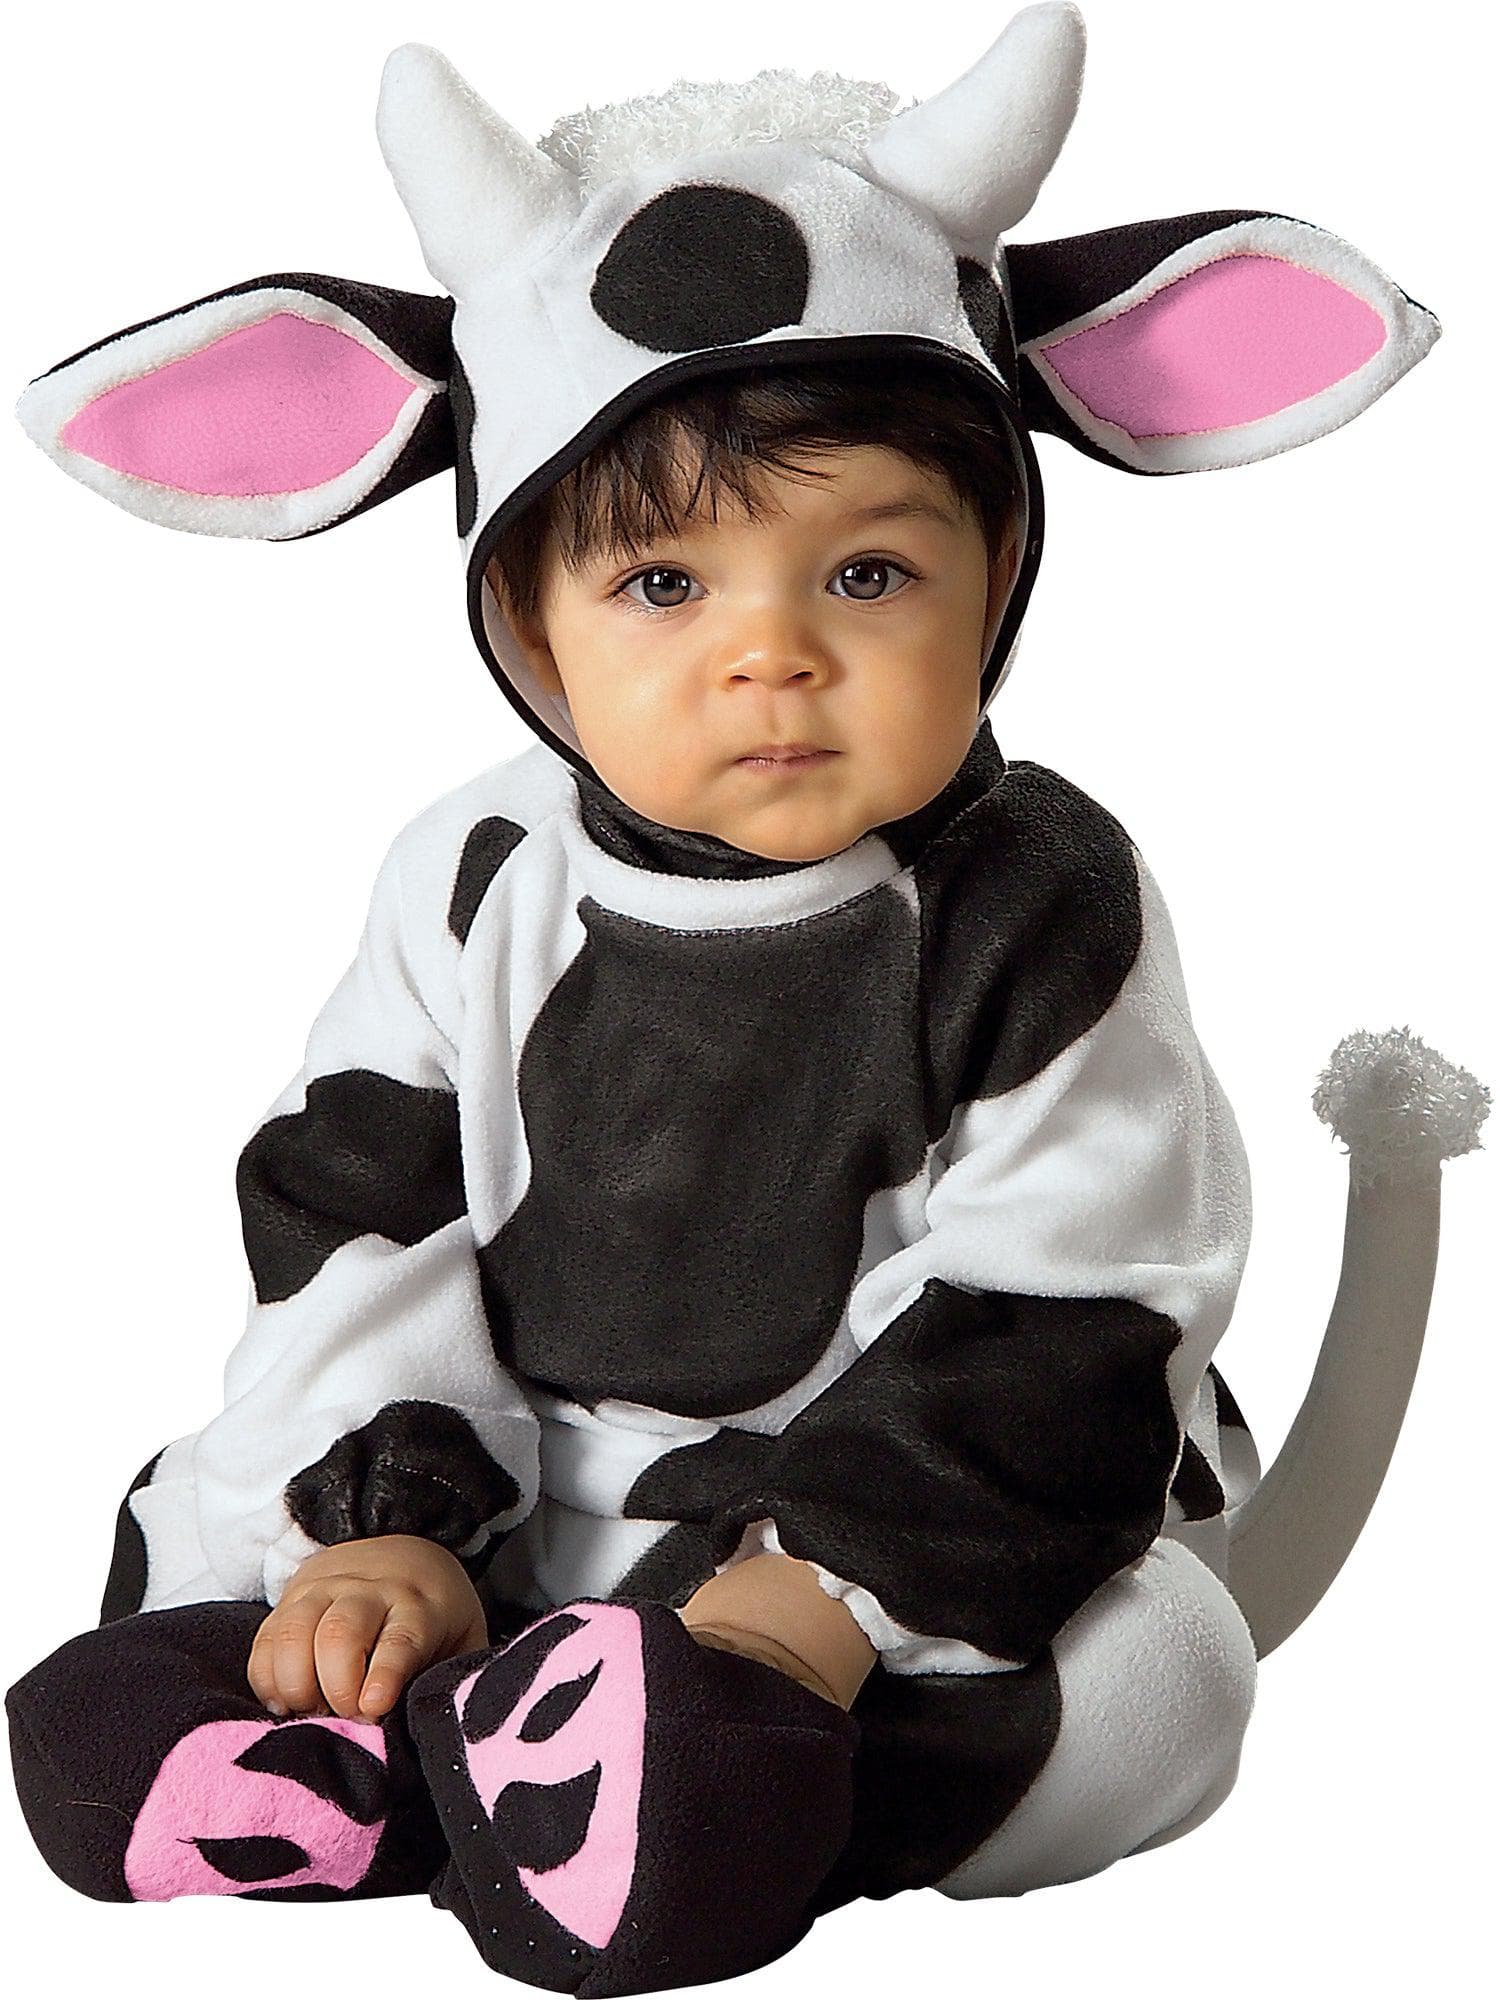 Black and White Cozy Cow Costume for Babies - costumes.com